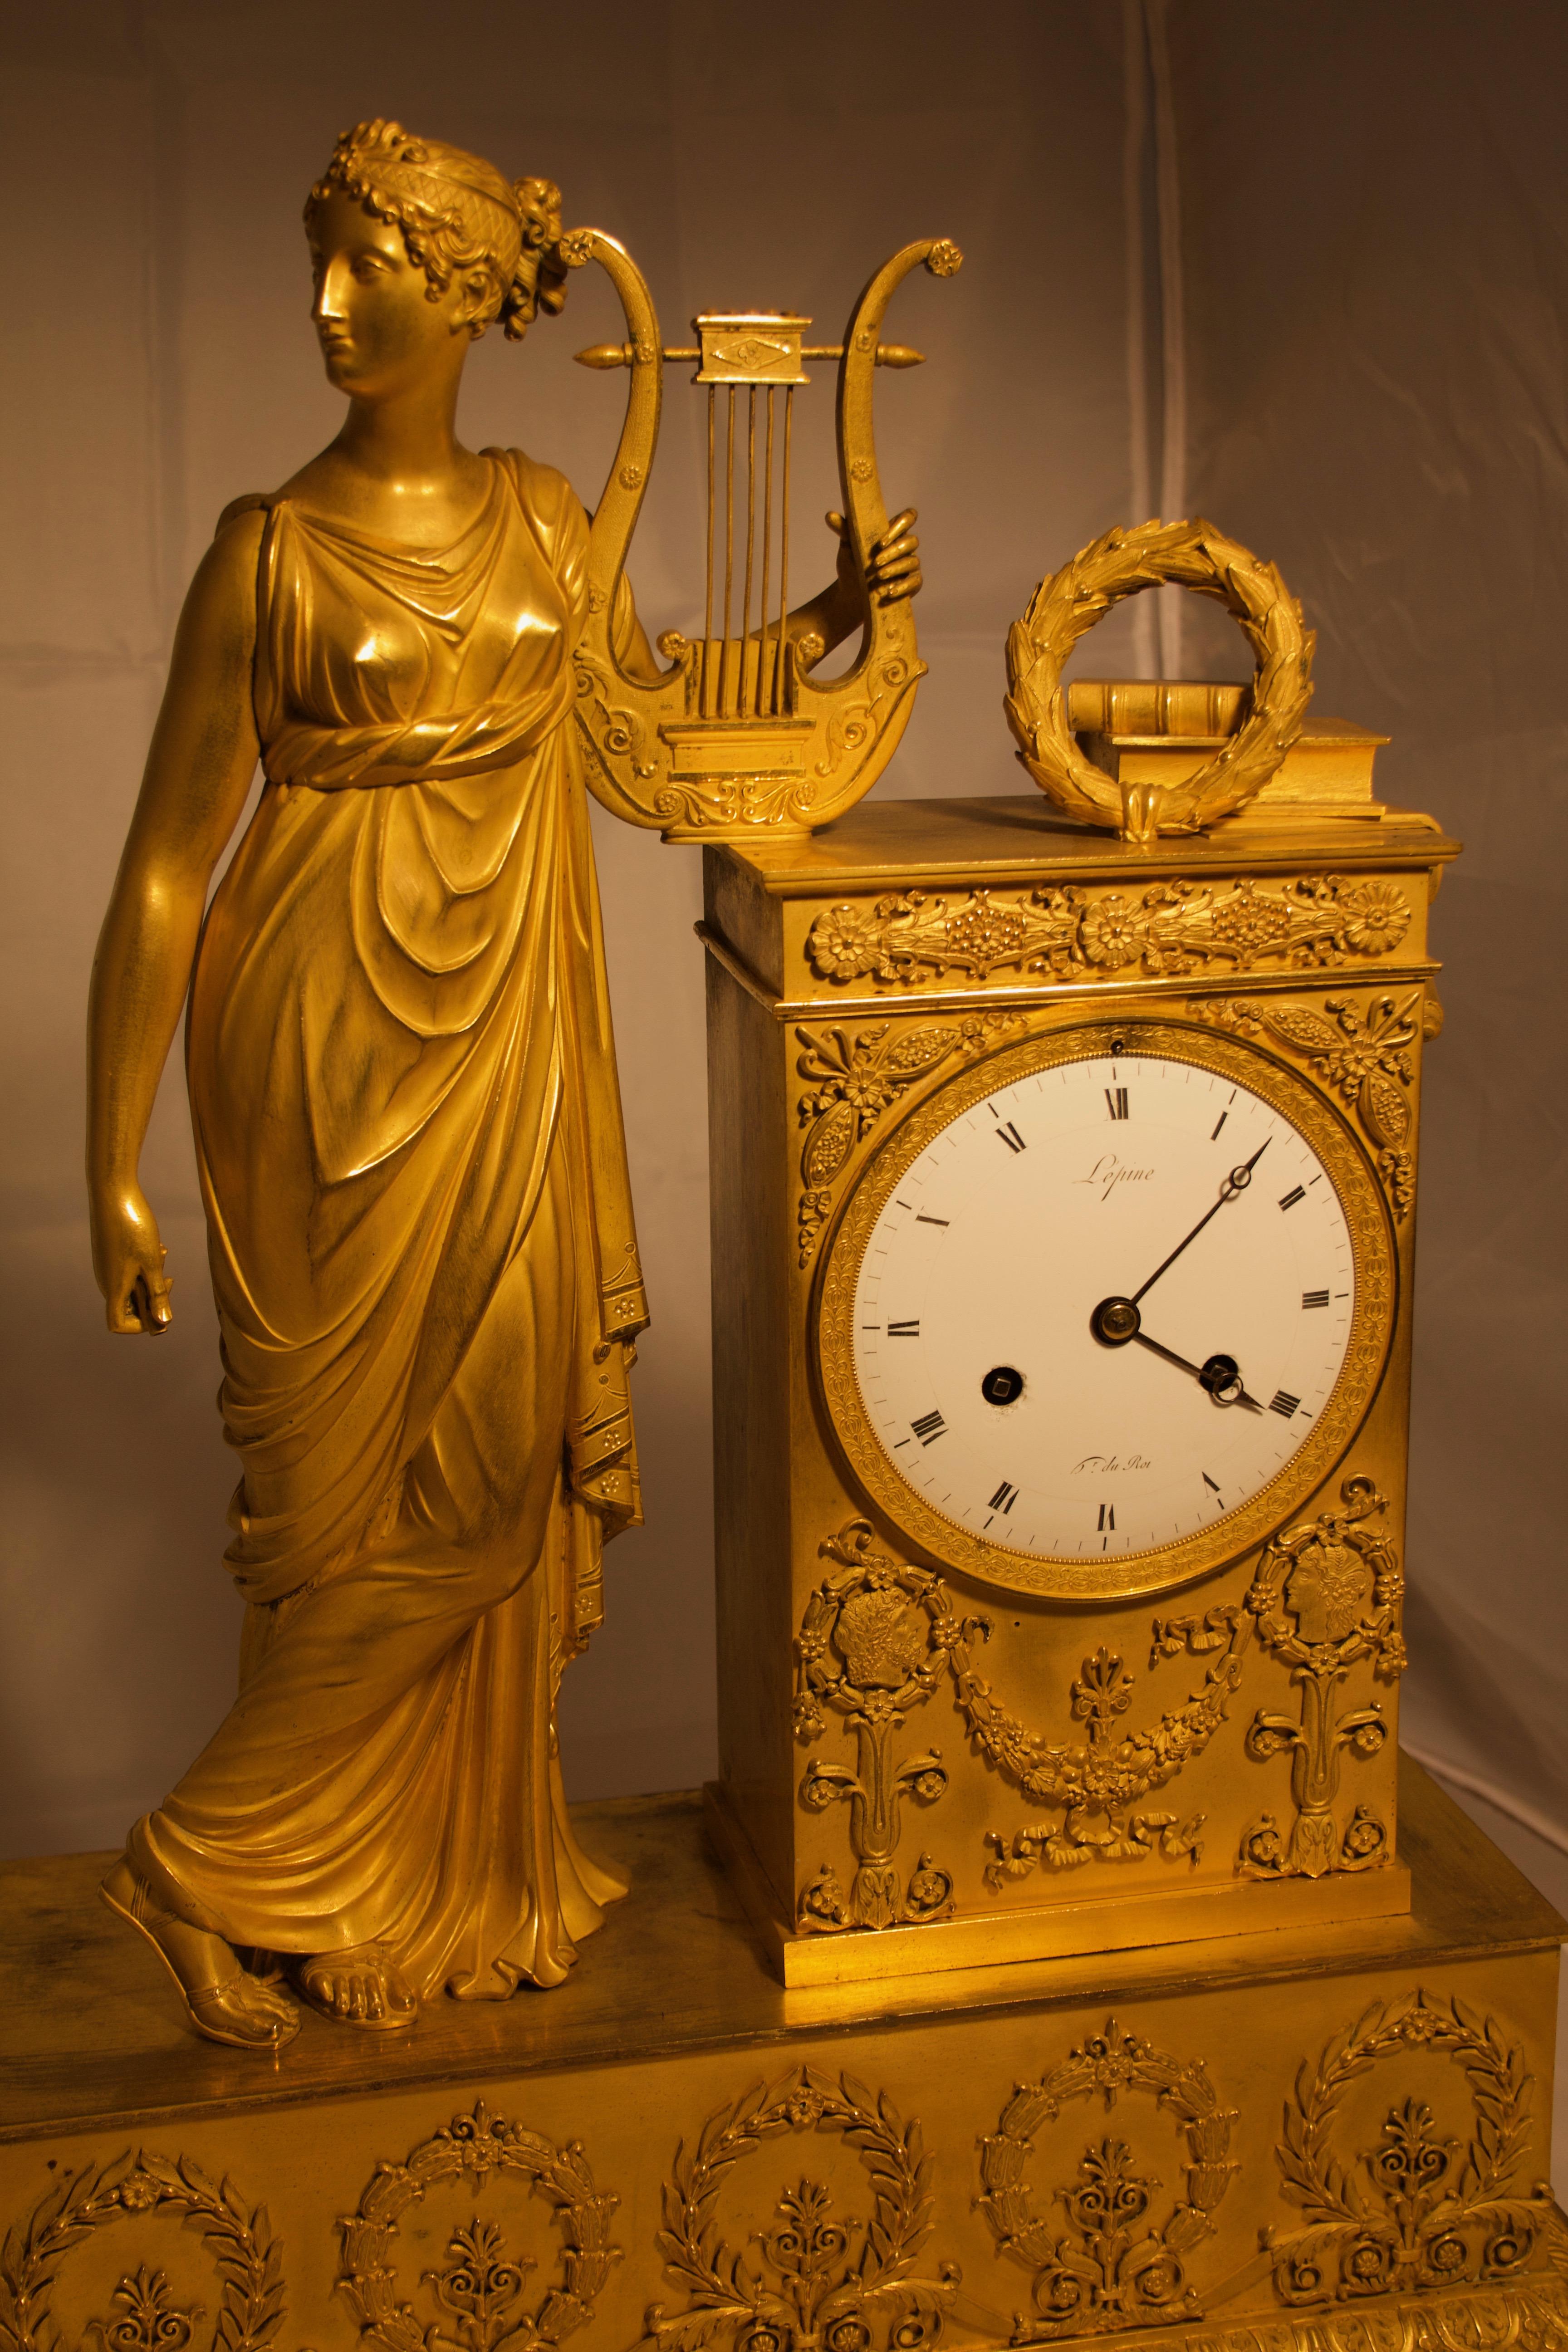 An important gilded bronze mantel clock from the early 19th century, signed by Lépine, France, the bronze statue depicts Tersicone, Musa della danza, with Arpa on a richly decorated plinth. White enamel dial with two charged forks, time and ring